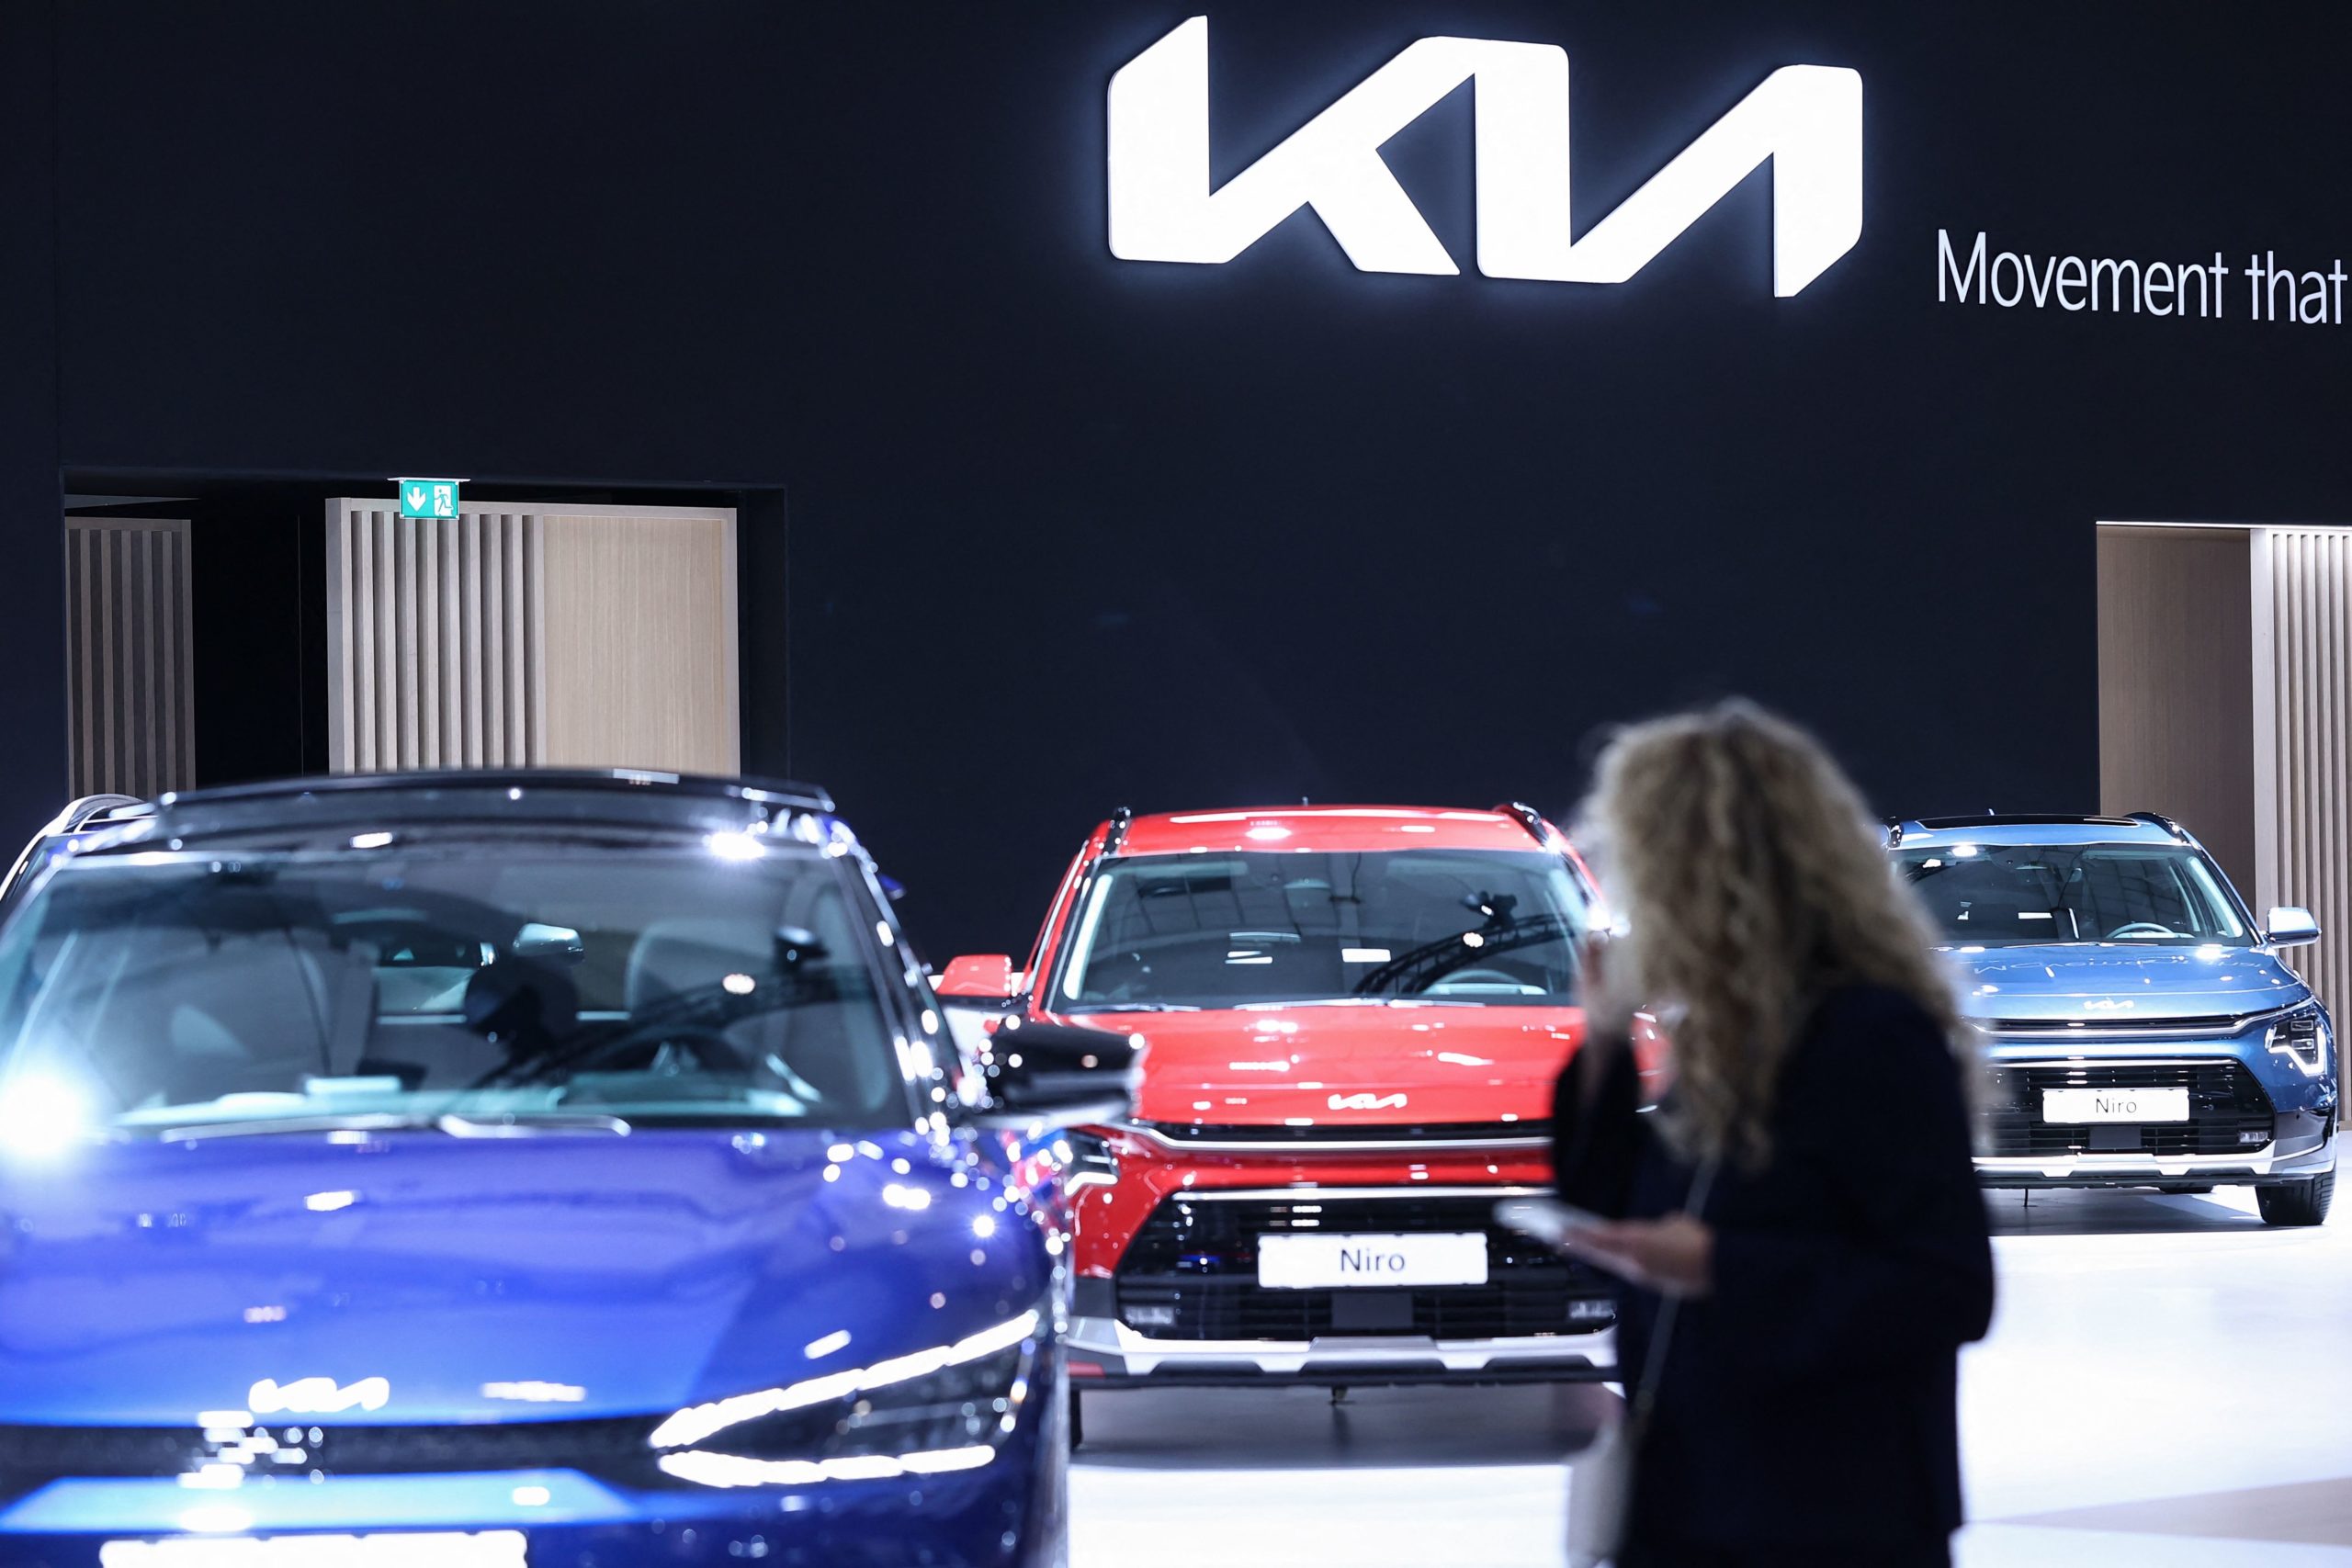 A woman visits the KIA stand during Brussels Motor Show on January 13, 2023 in Brussels. (Photo by Kenzo TRIBOUILLARD / AFP) (Photo by KENZO TRIBOUILLARD/AFP via Getty Images)